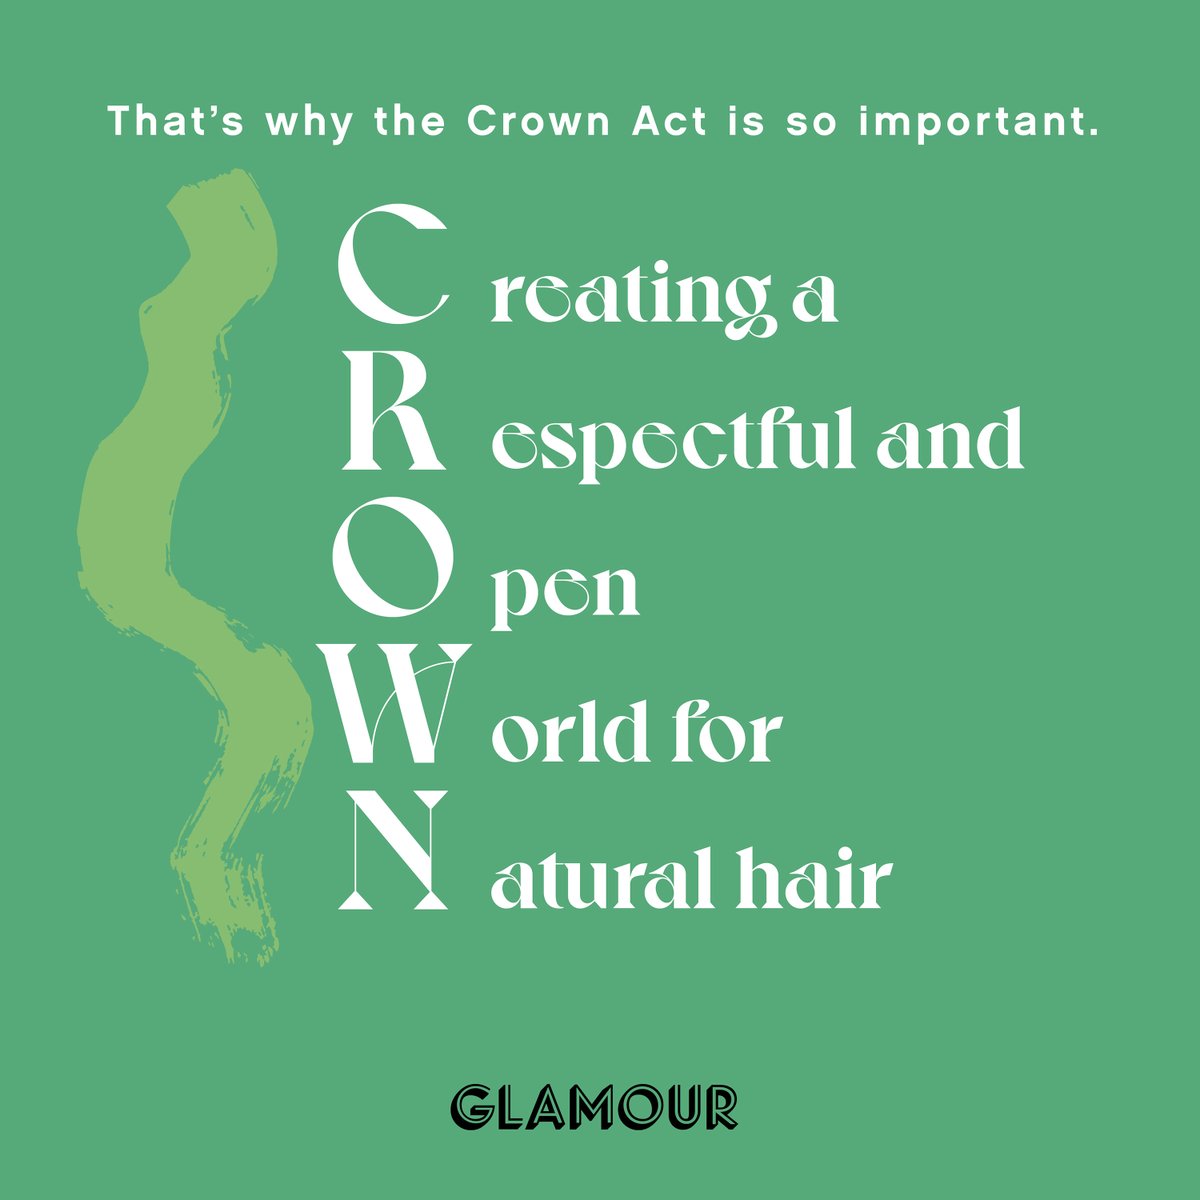 Together, we have the power to end hair discrimination. To demand  #TheCrownAct gets passed in your state, sign the petition.   http://glmr.co/QmqZoZK   #OurHairIssue